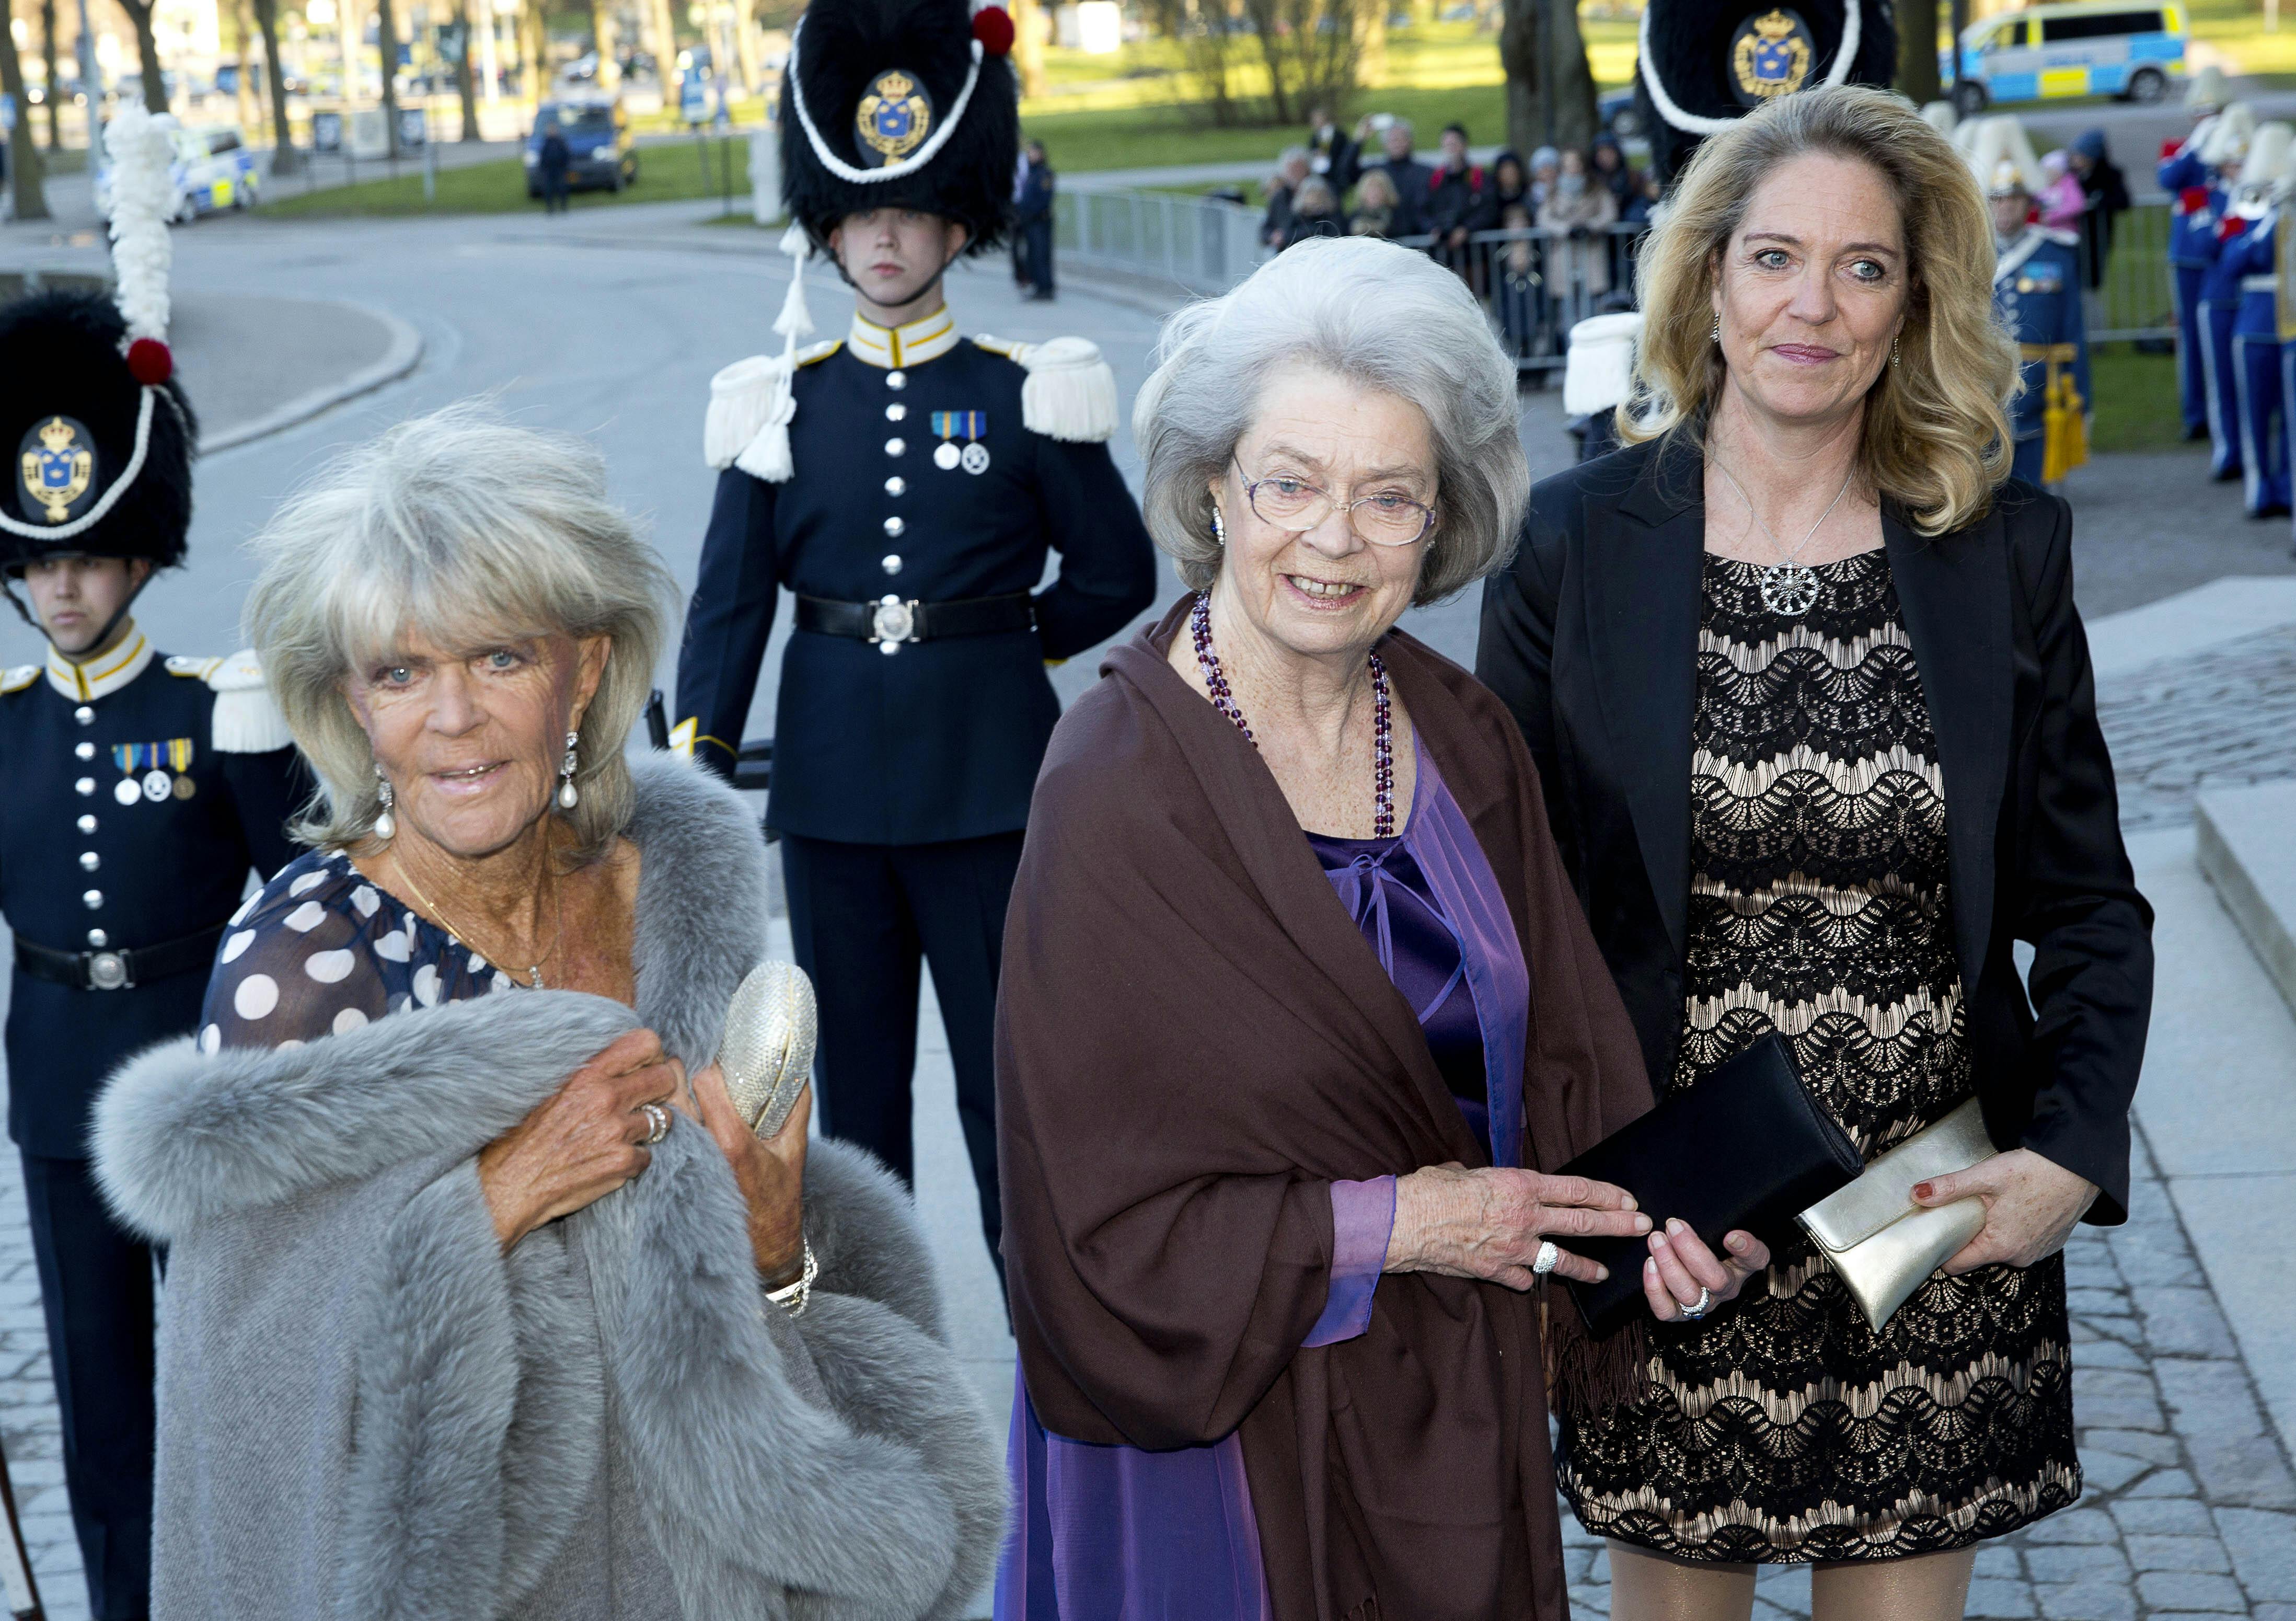 Princess Birgitta (L-R), Princess Desiree and Princess Margaretha of Sweden arrive at the Nordic museum for the concert by the Royal Swedish Opera and Stockholm Concert on the occasion of the 70th birthday of the Swedish King Carl Gustaf in Stockholm, Sweden, 29 April 2016. Photo by: Albert Nieboer/picture-alliance/dpa/AP Images